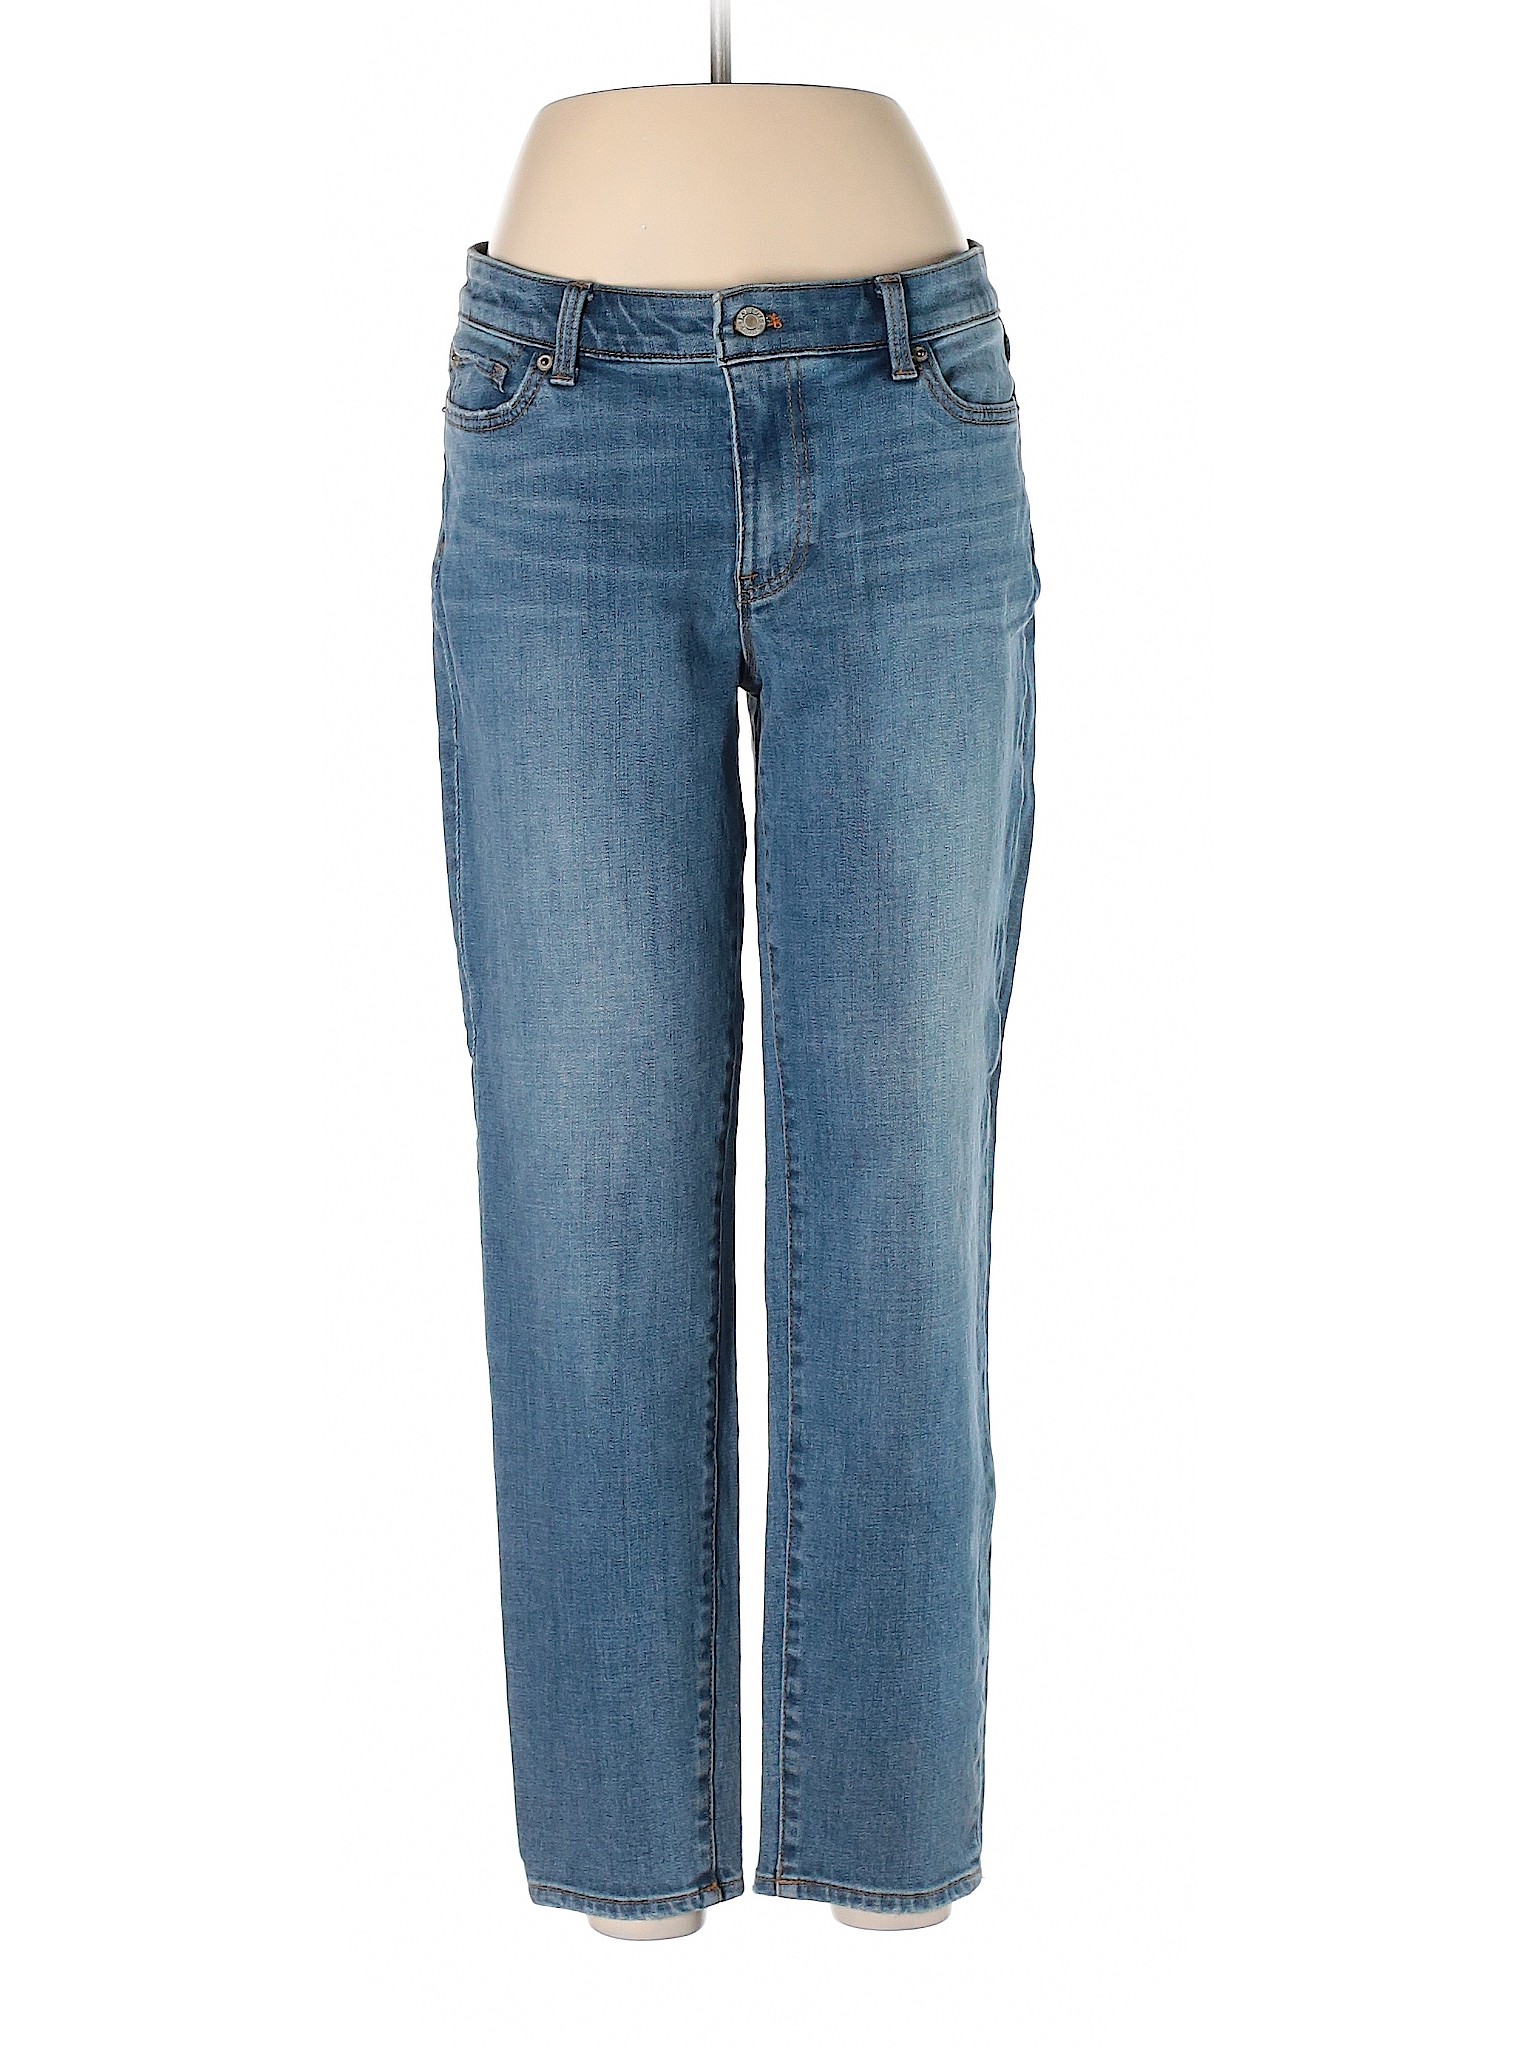 Talbots Women's Jeans On Sale Up To 90% Off Retail | thredUP